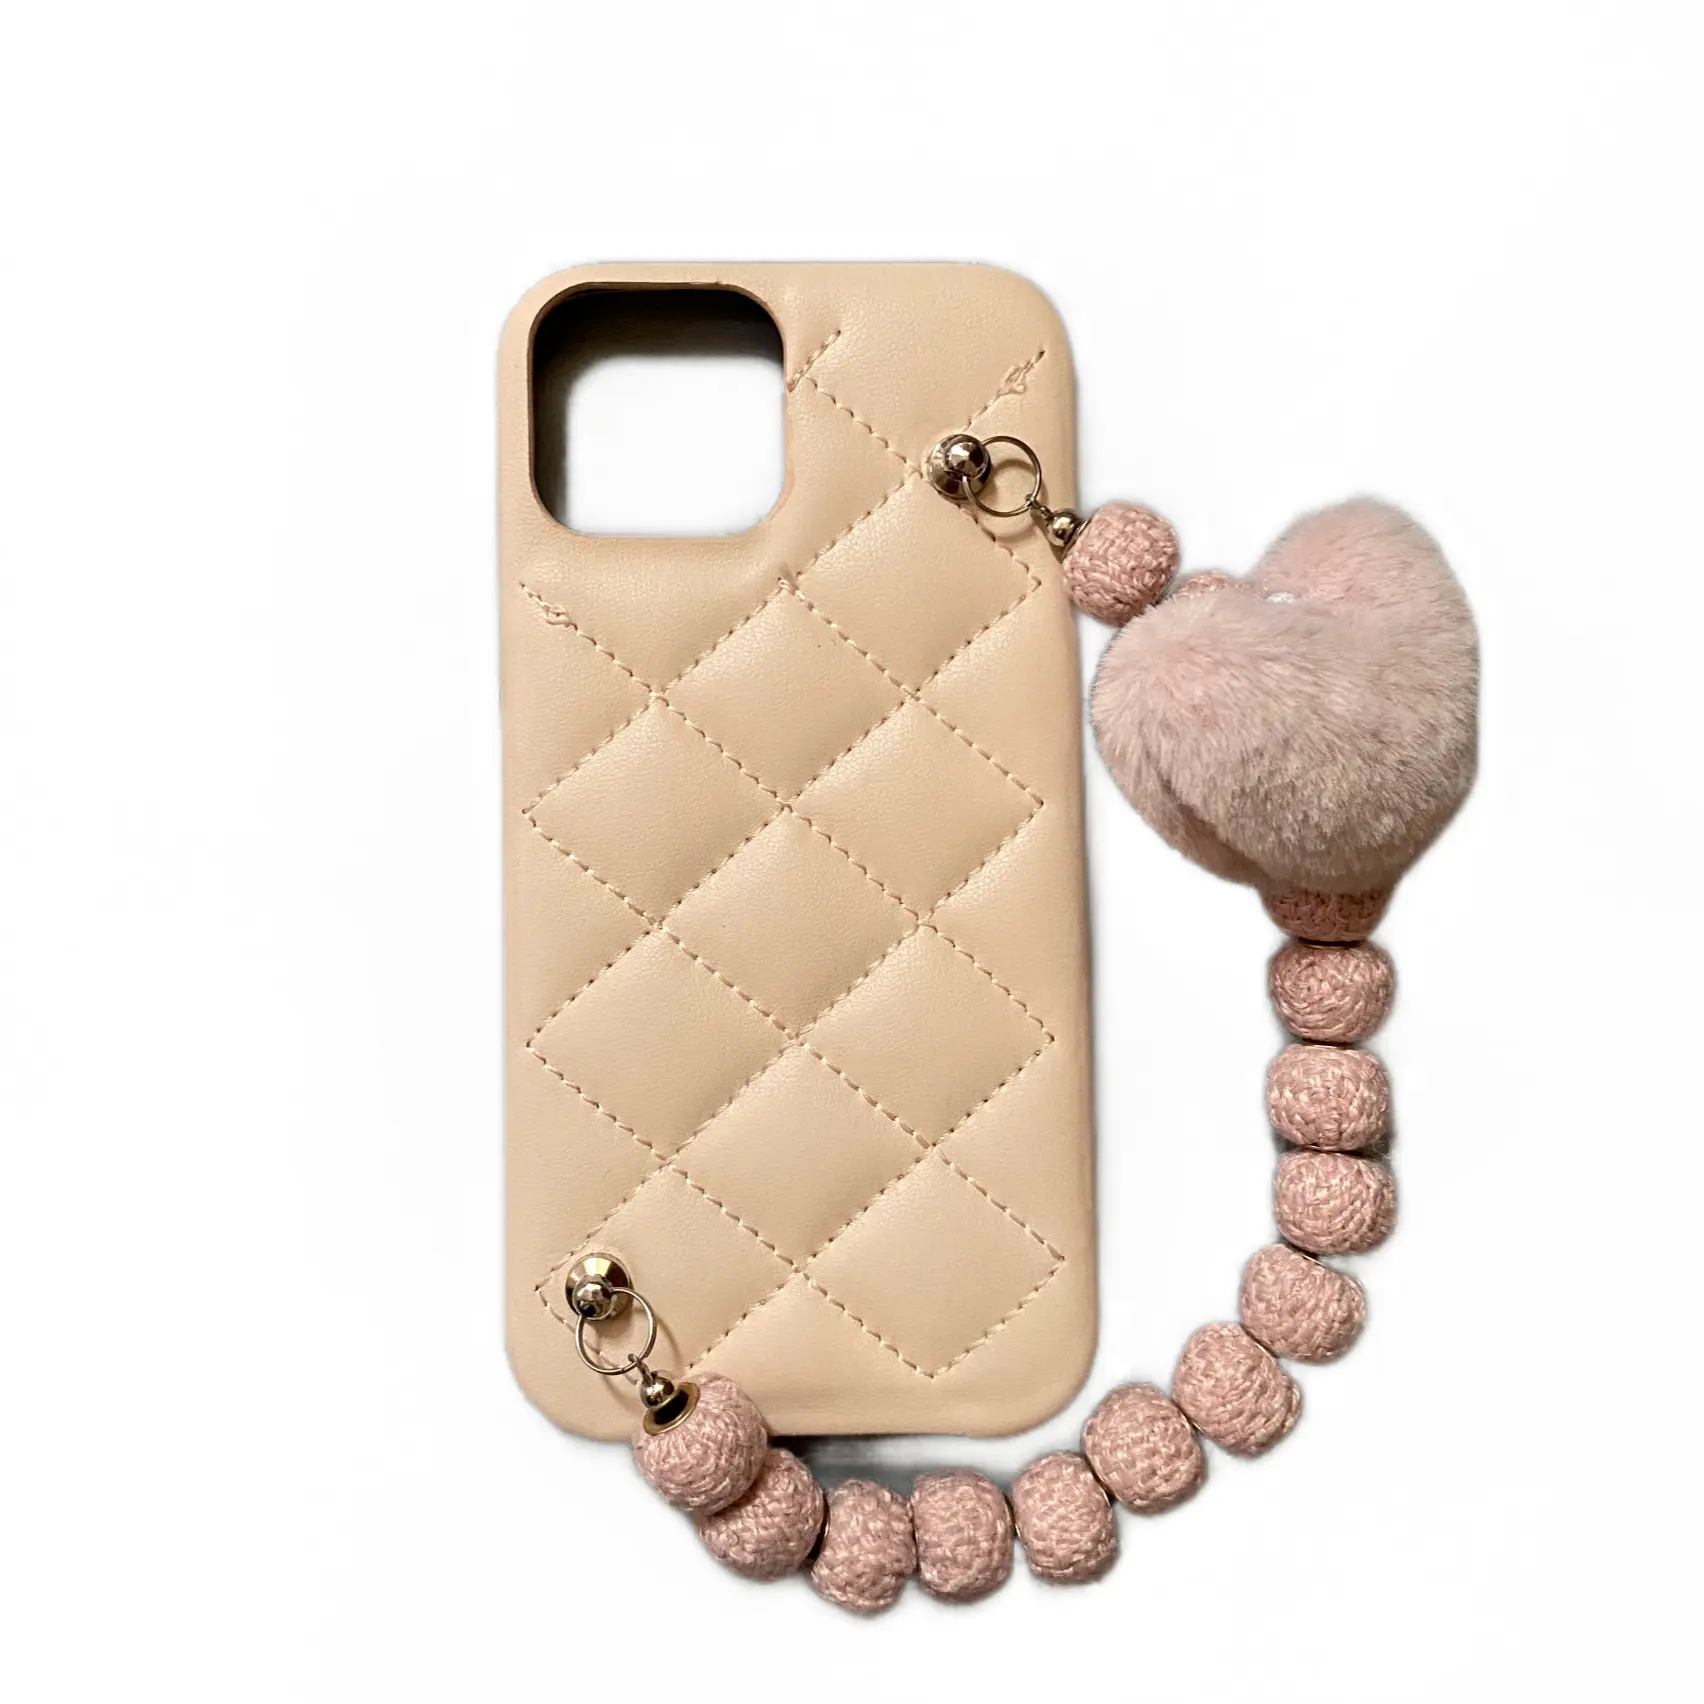 CHEAP CASES outlet Wholesale phone cases with chain emliy in paris shelled skull face cases iPhone Covers from factory